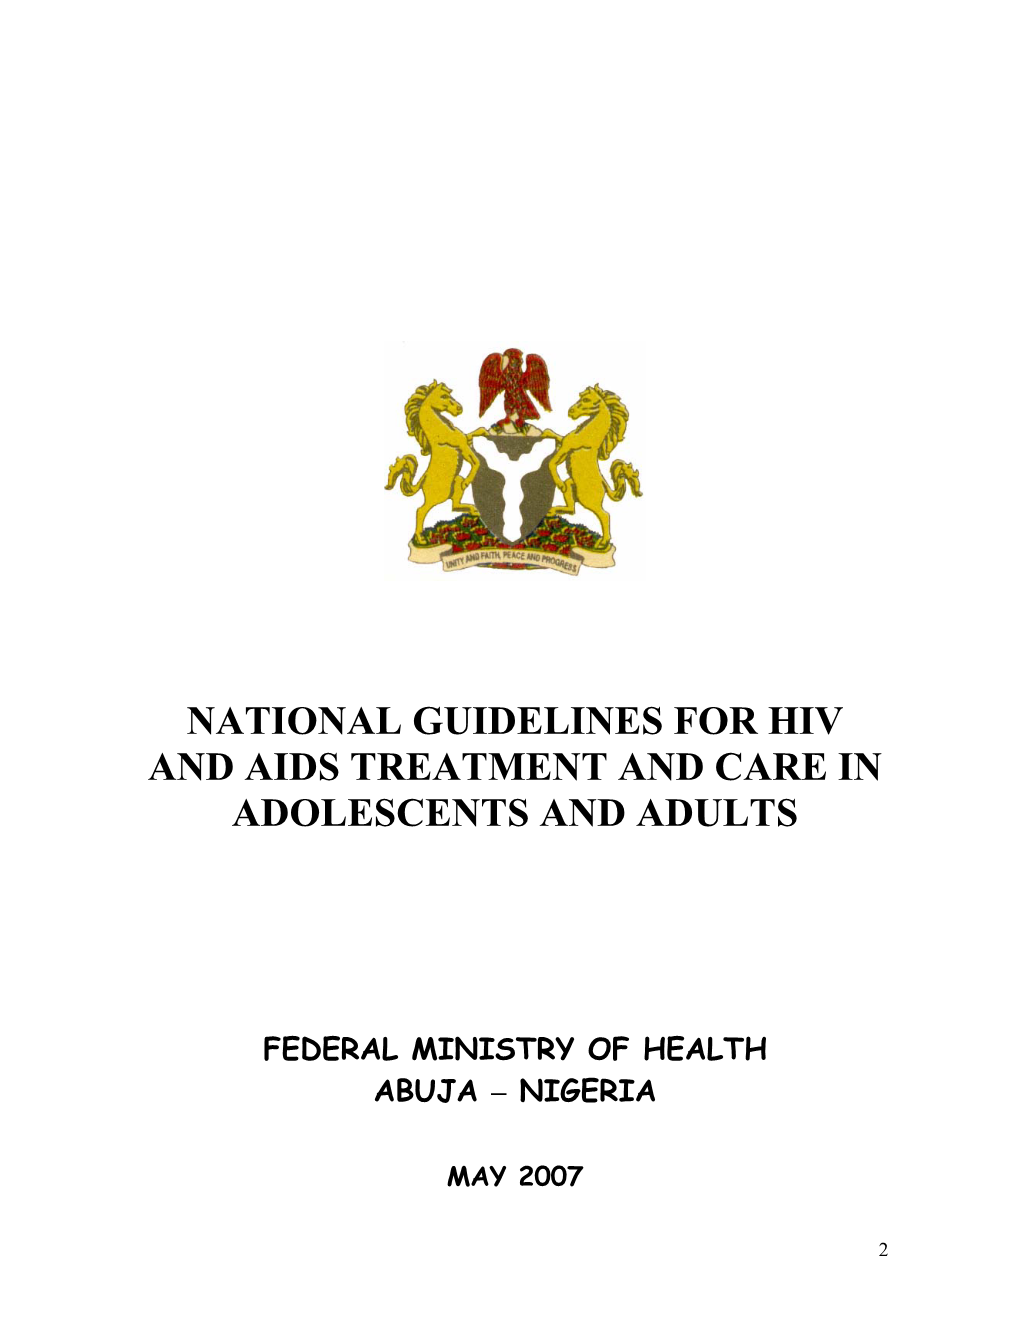 National Guidelines for Hiv and Aids Treatment and Care in Adolescents and Adults